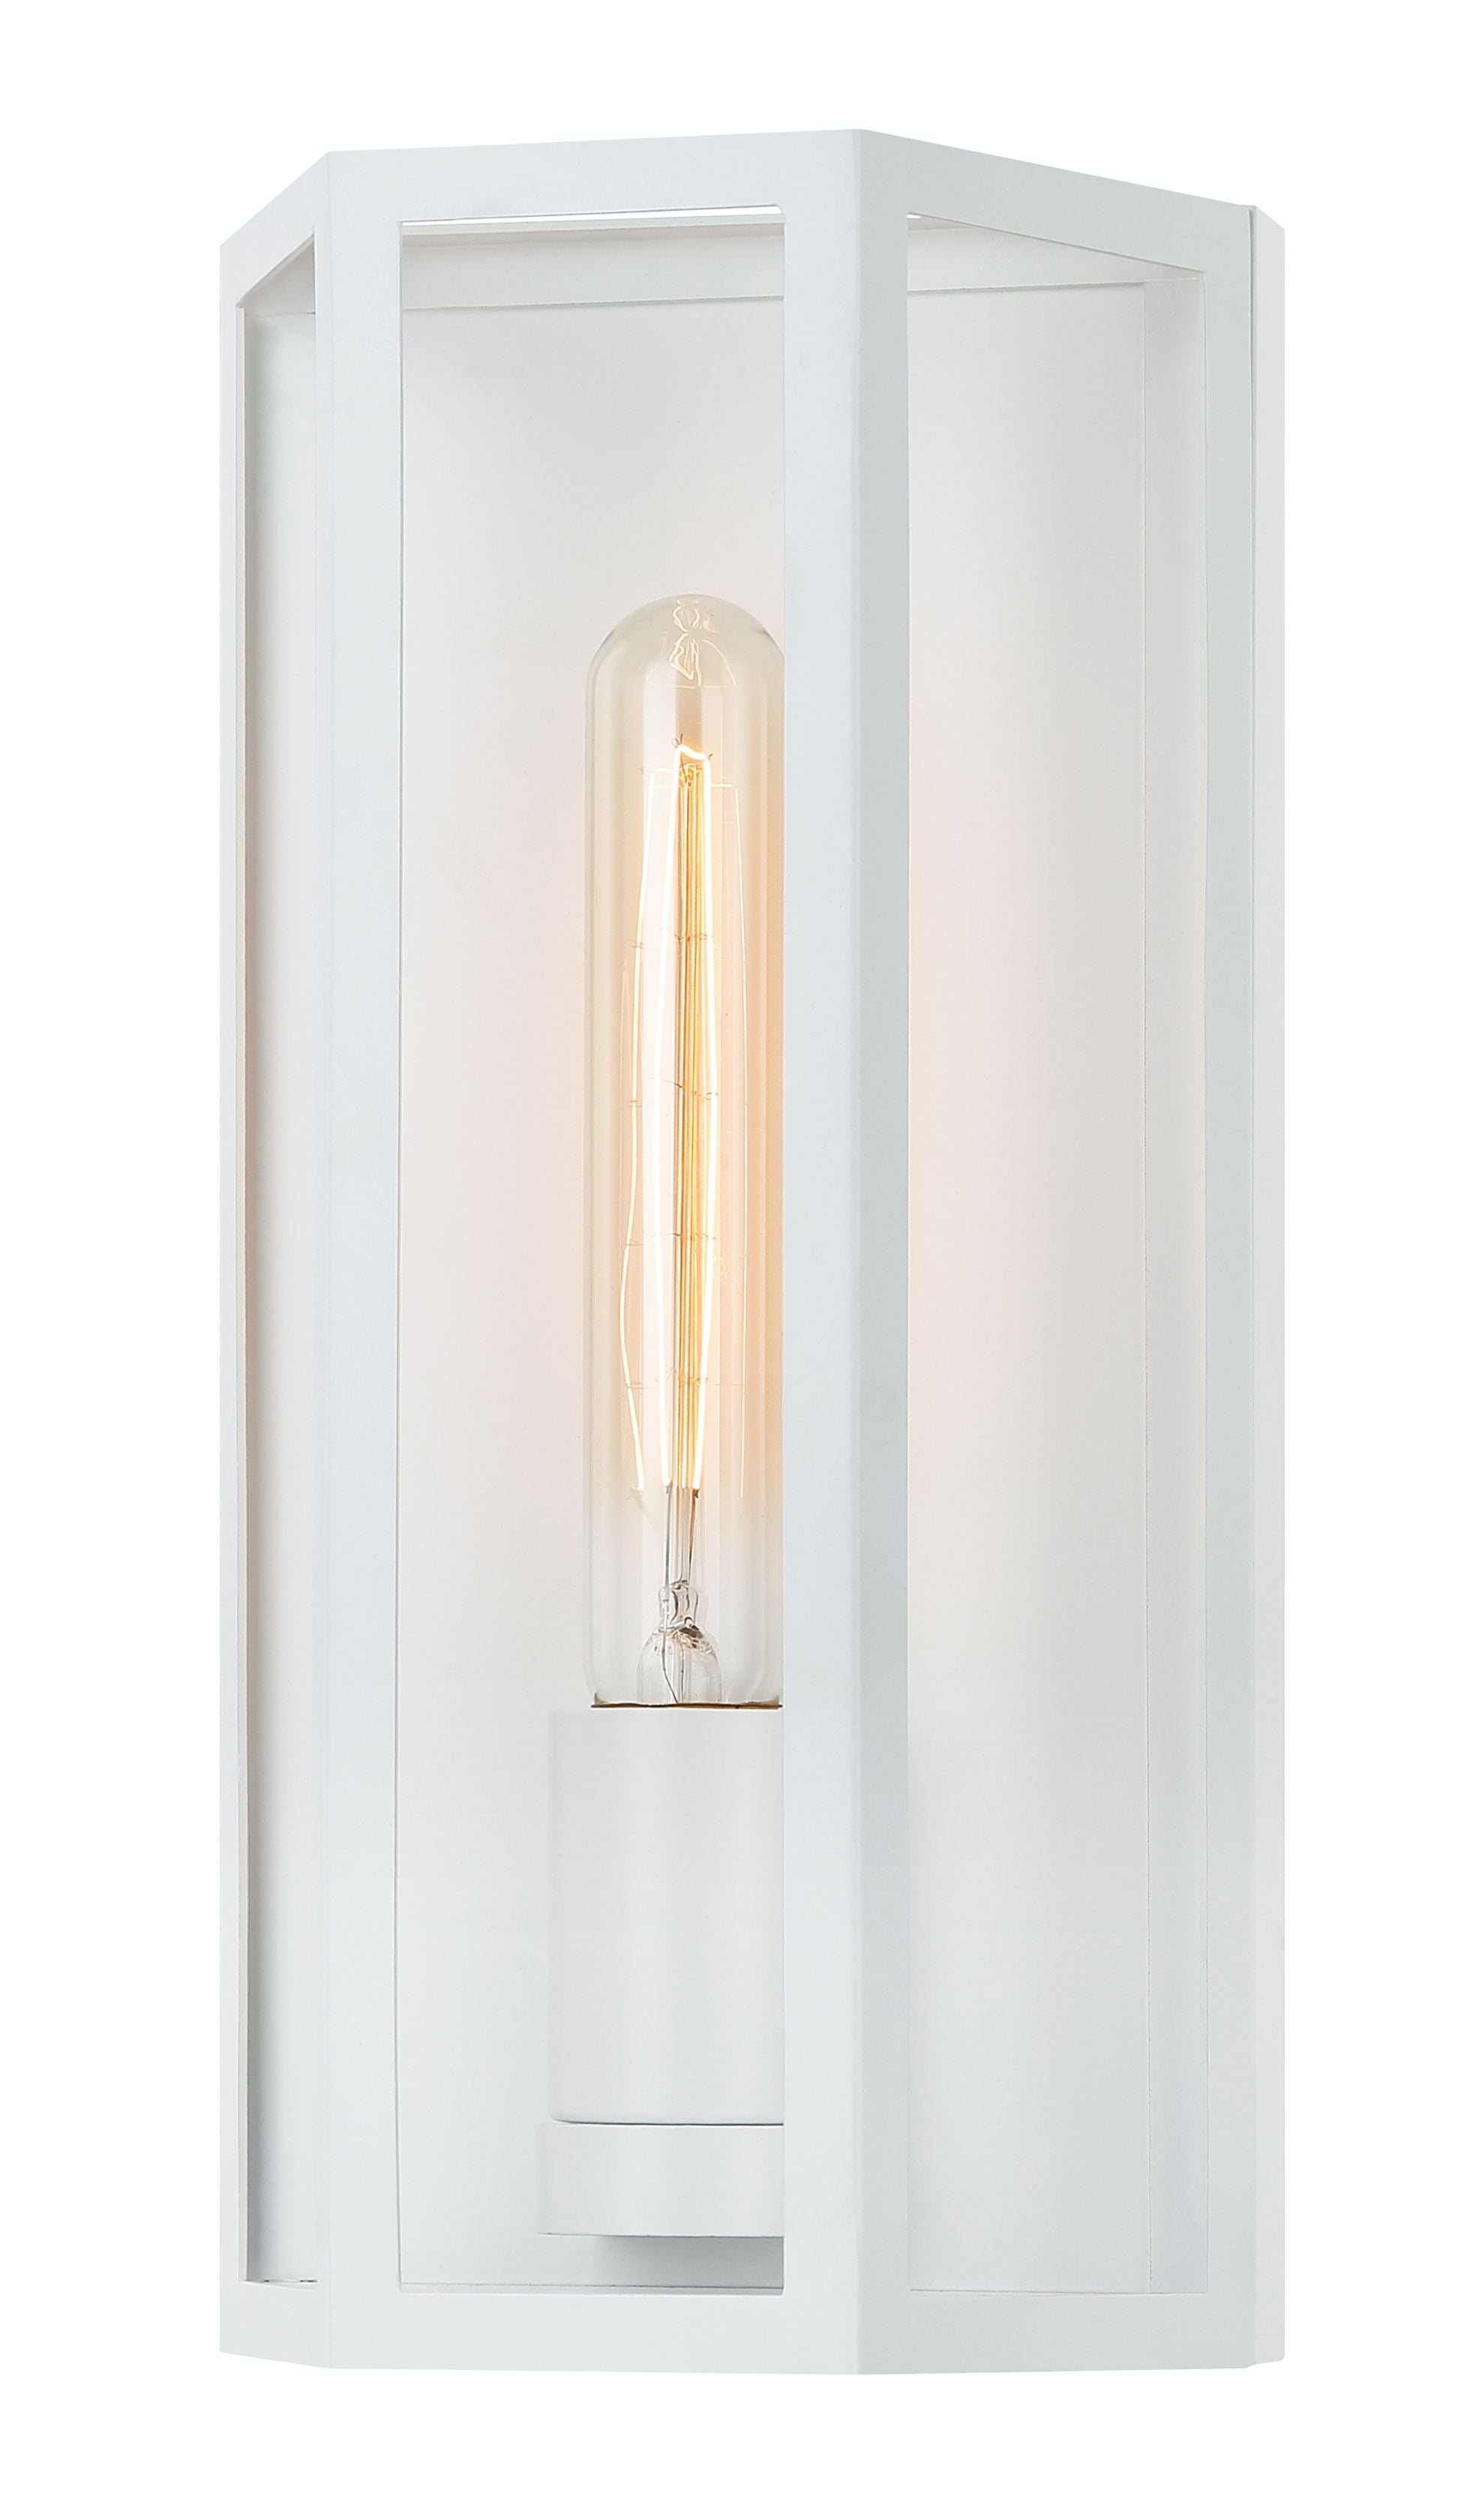 CREED Wall sconce White - W64501WH | TEO